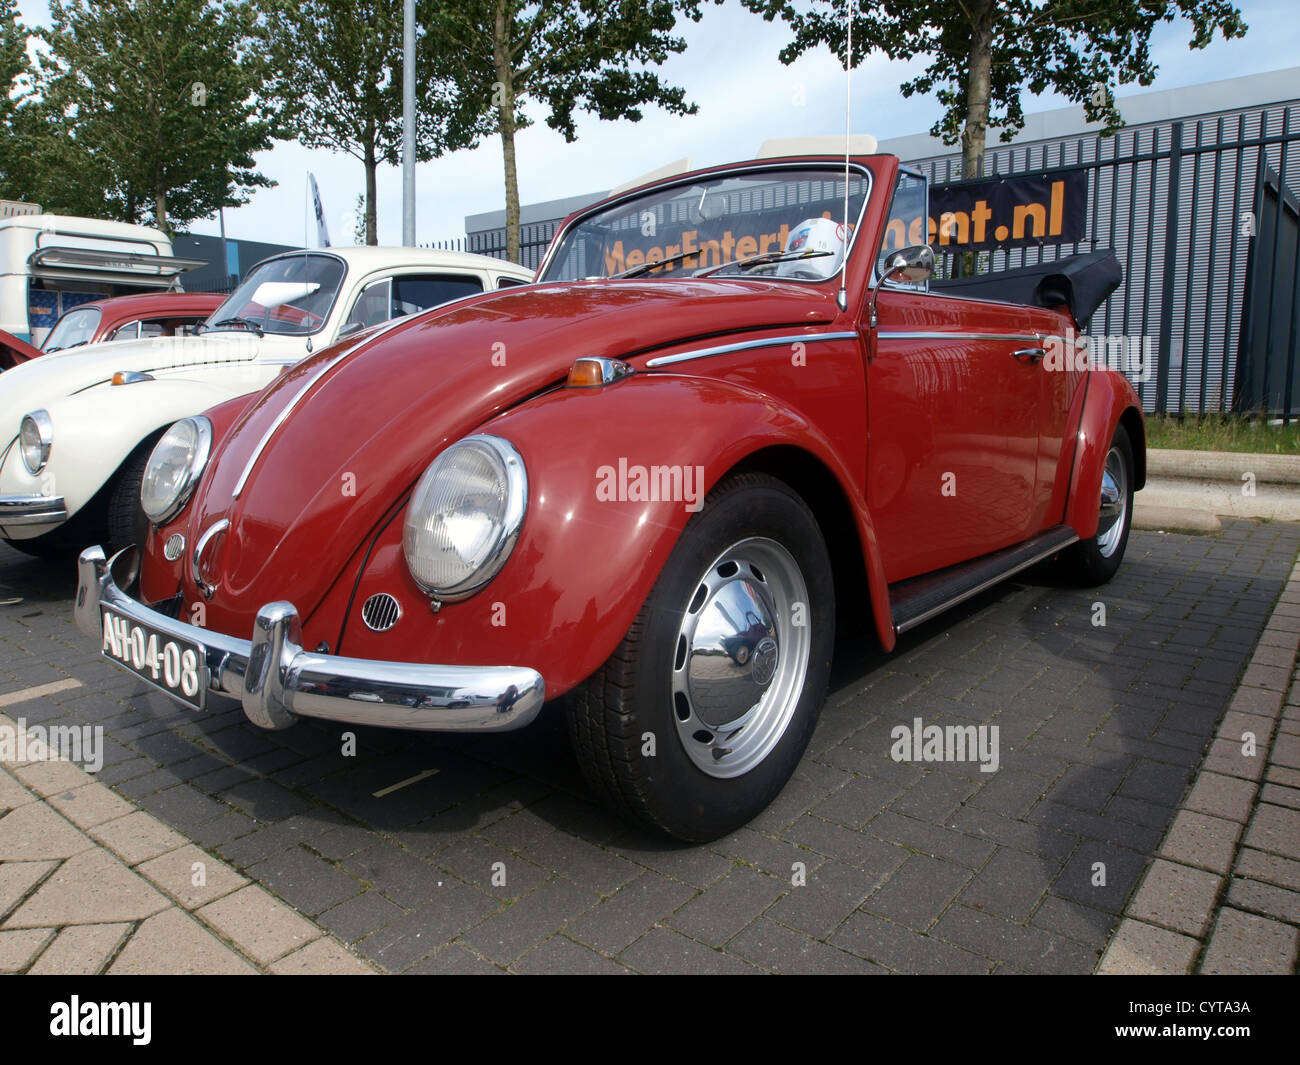 Volkswagen 1200 Beetle High Resolution Stock Photography and Images - Alamy